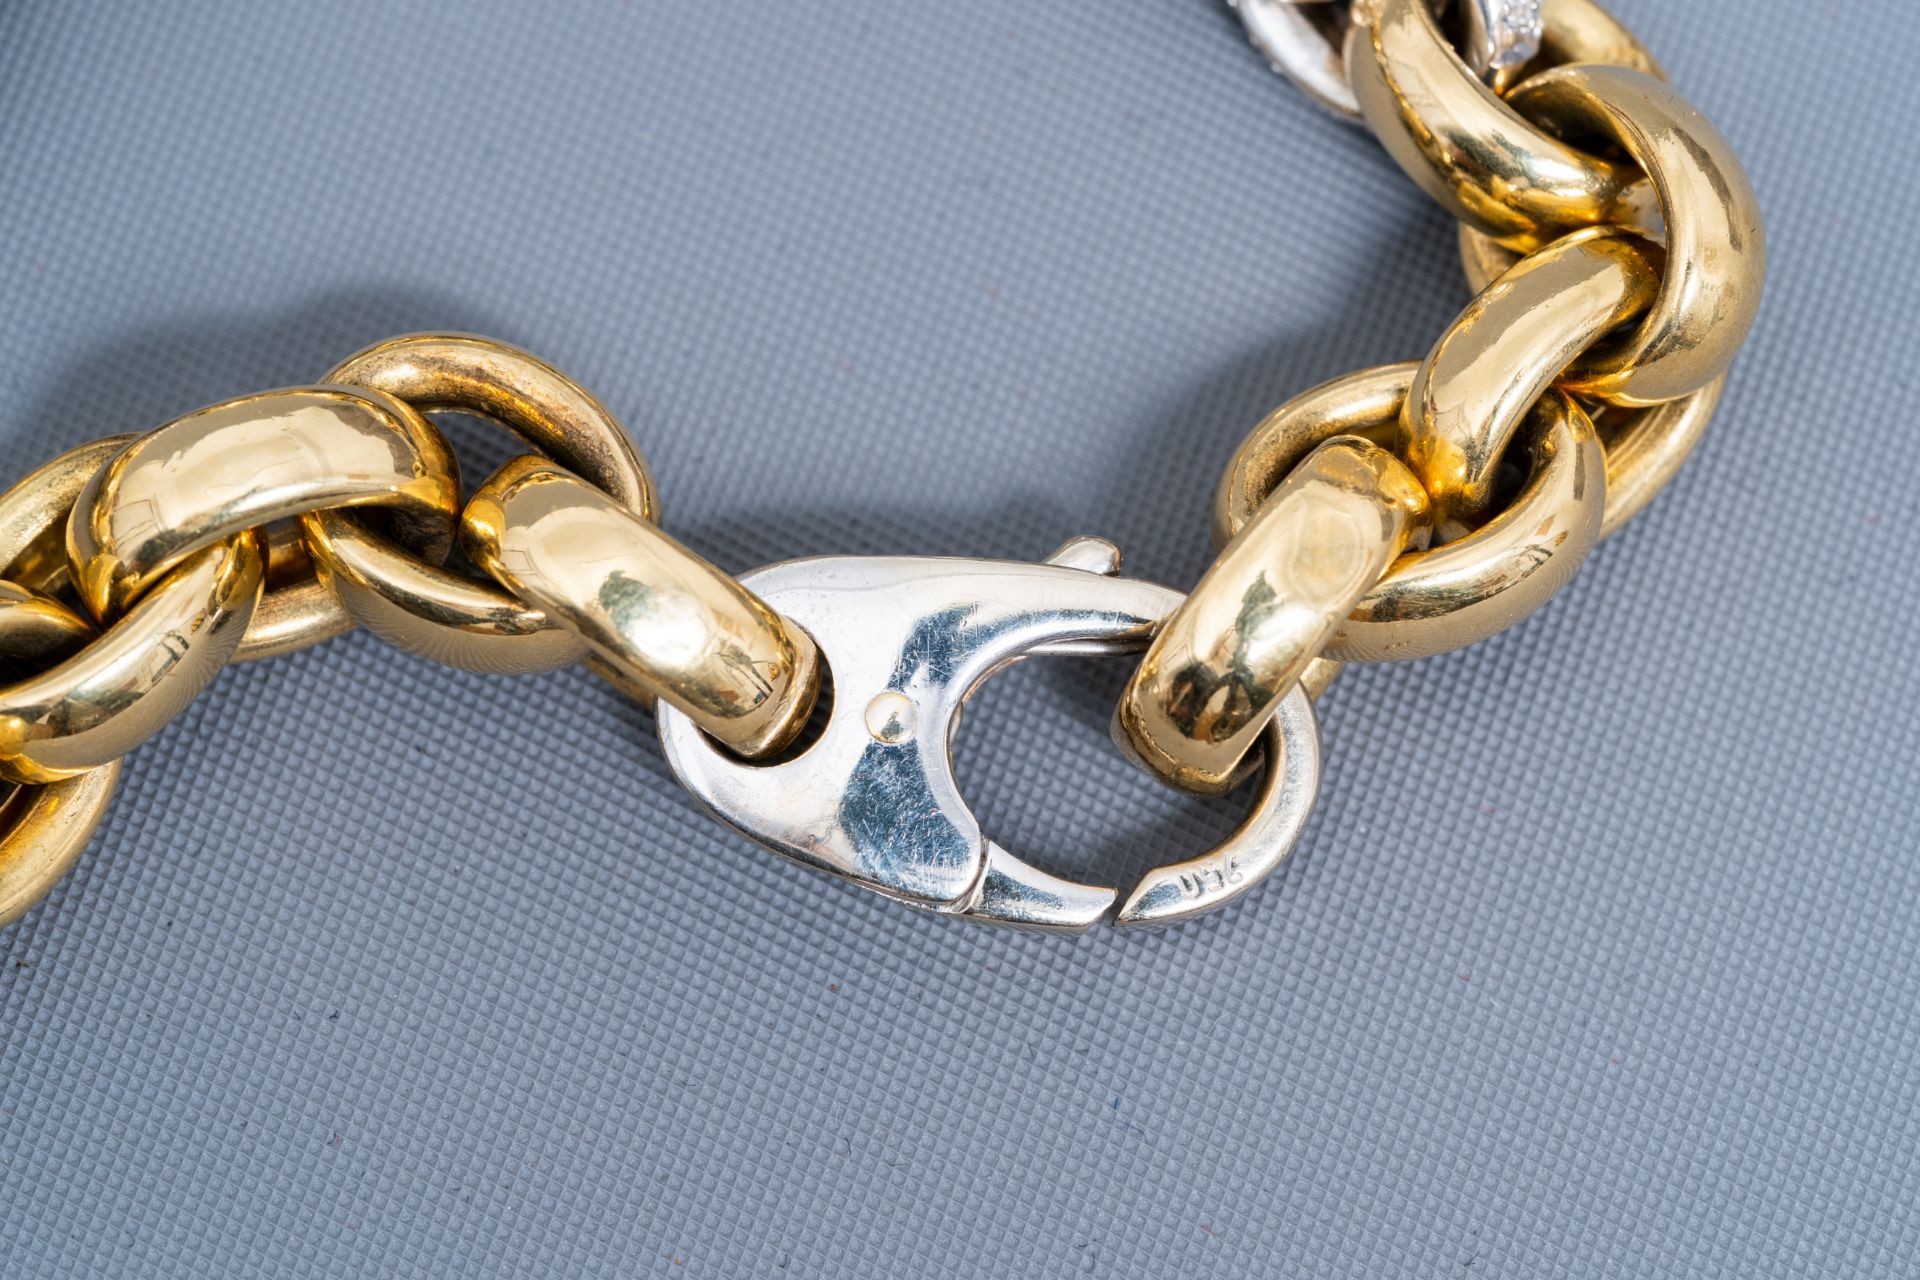 An 18 carat yellow and white gold bracelet set with 108 diamonds, 20th C. - Image 3 of 5